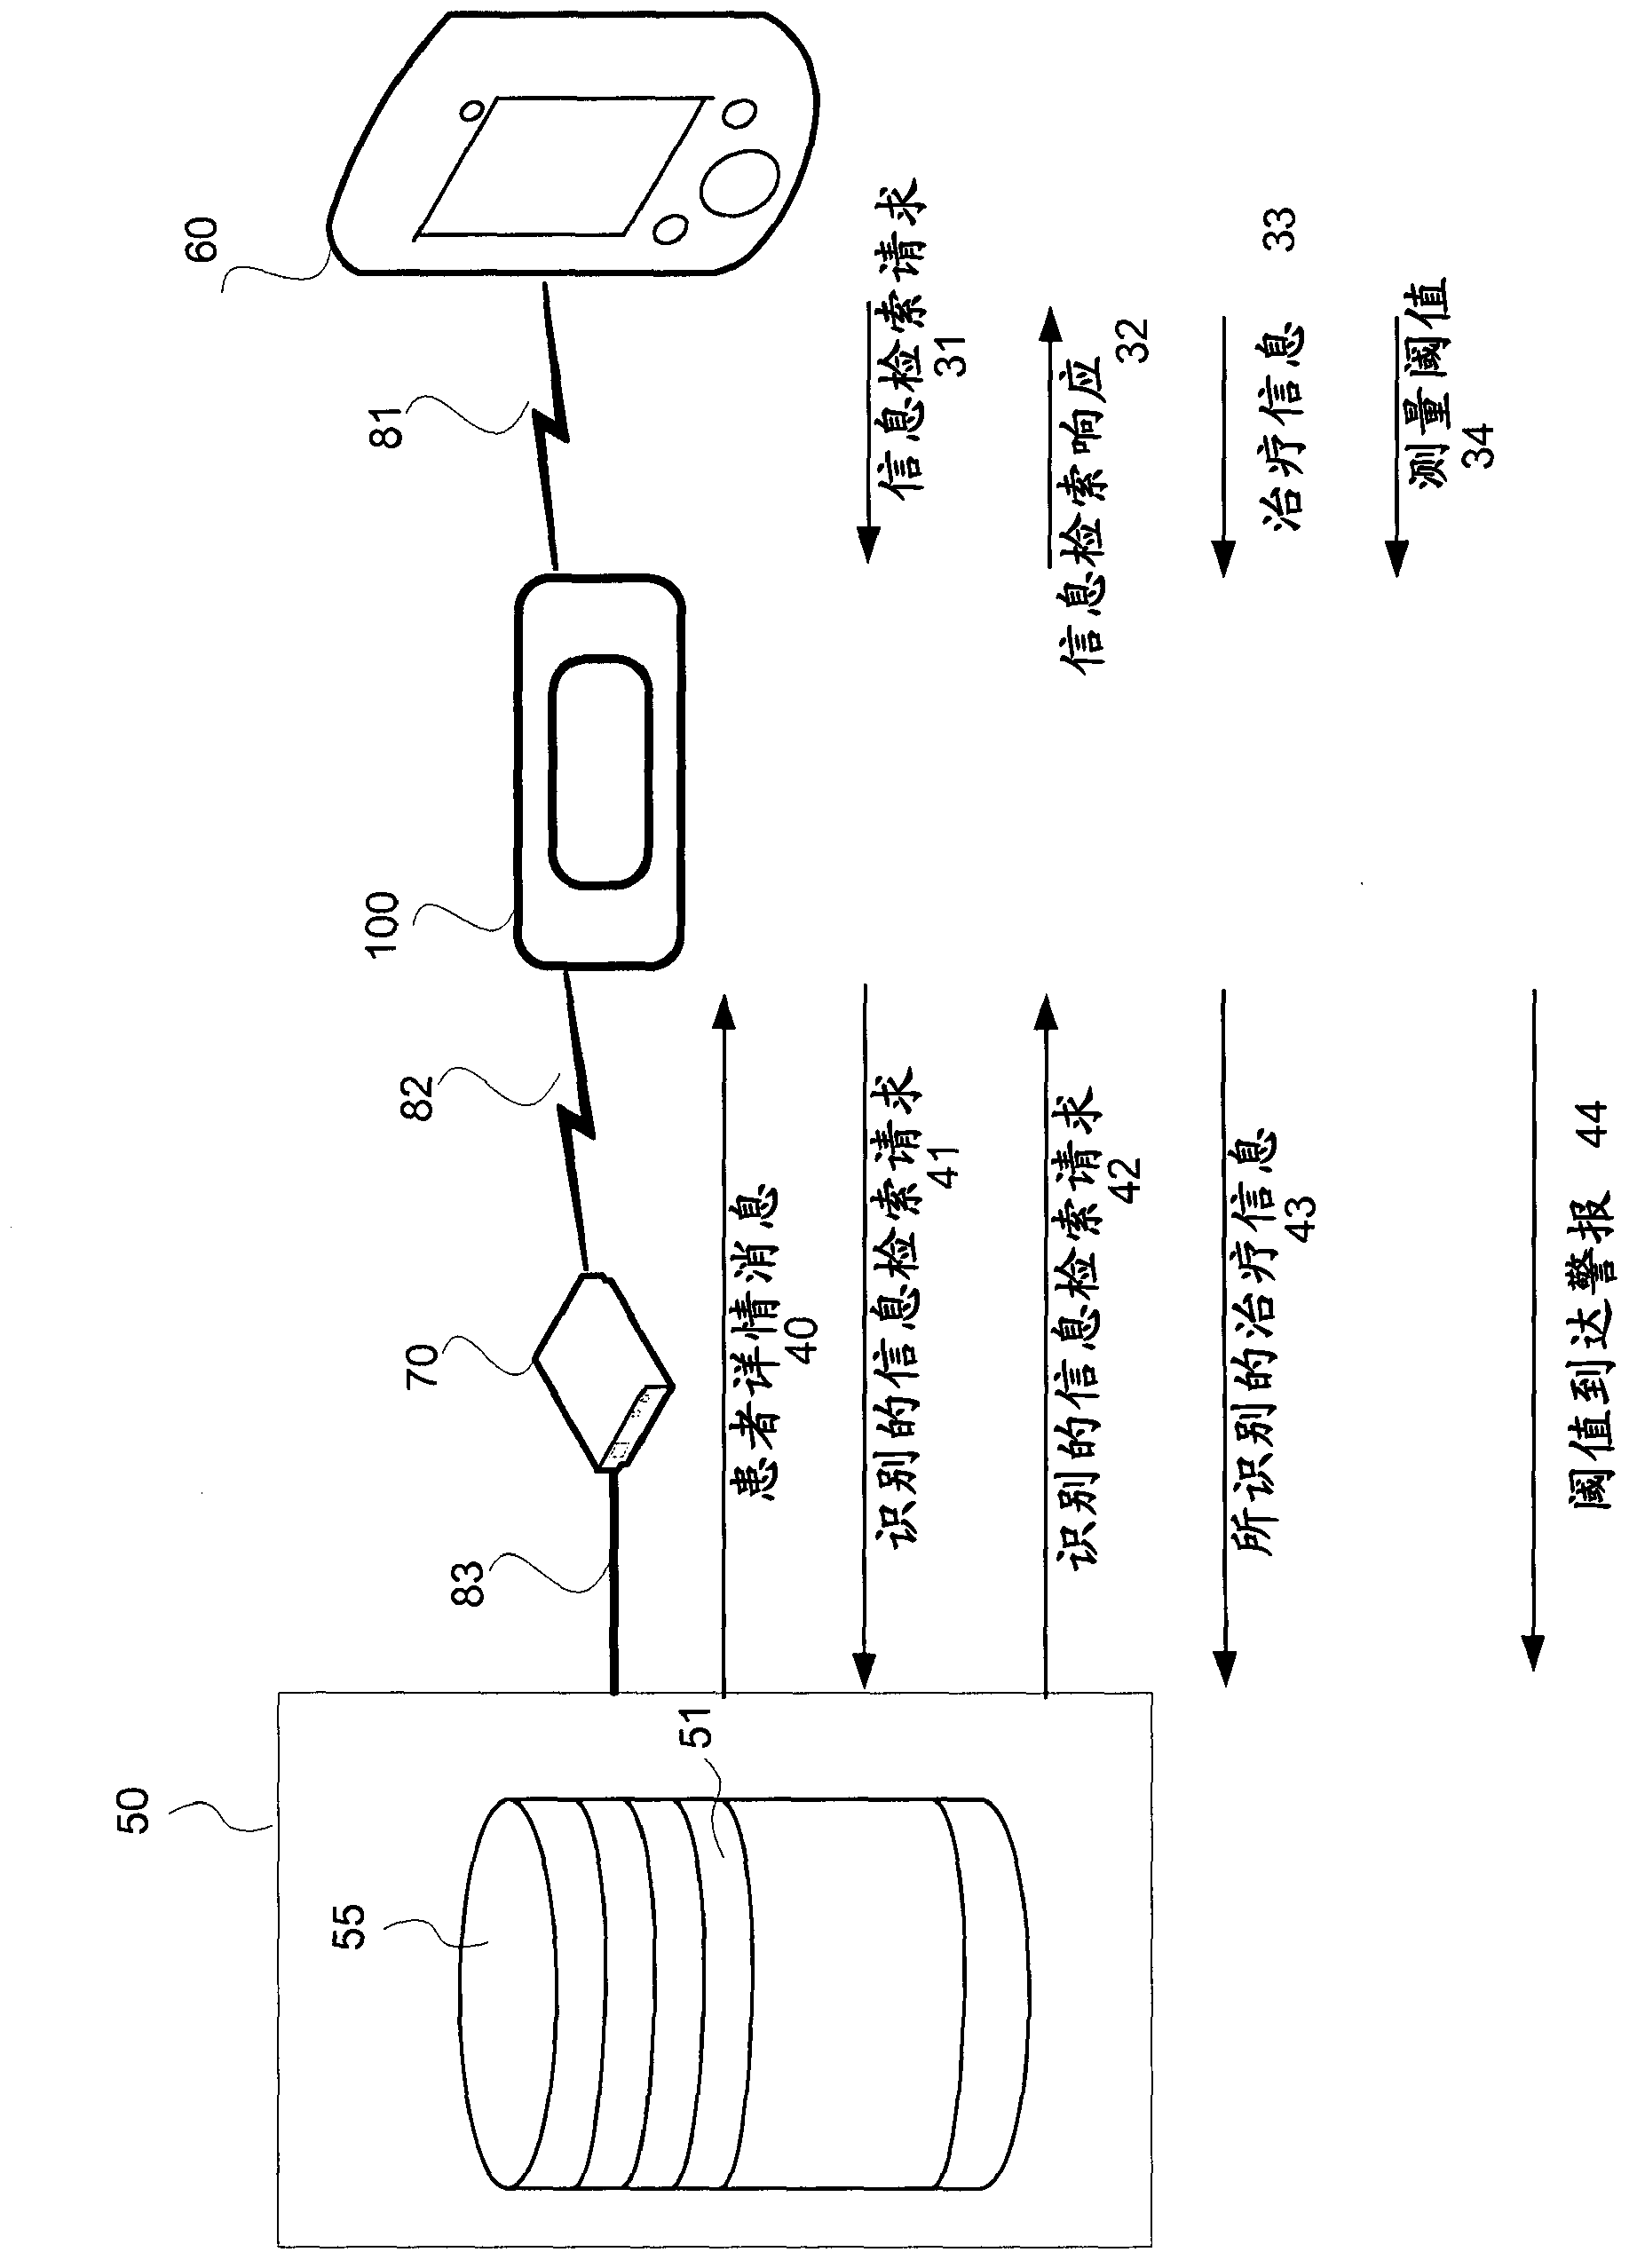 An adhesive bandage and a method for controlling patient information